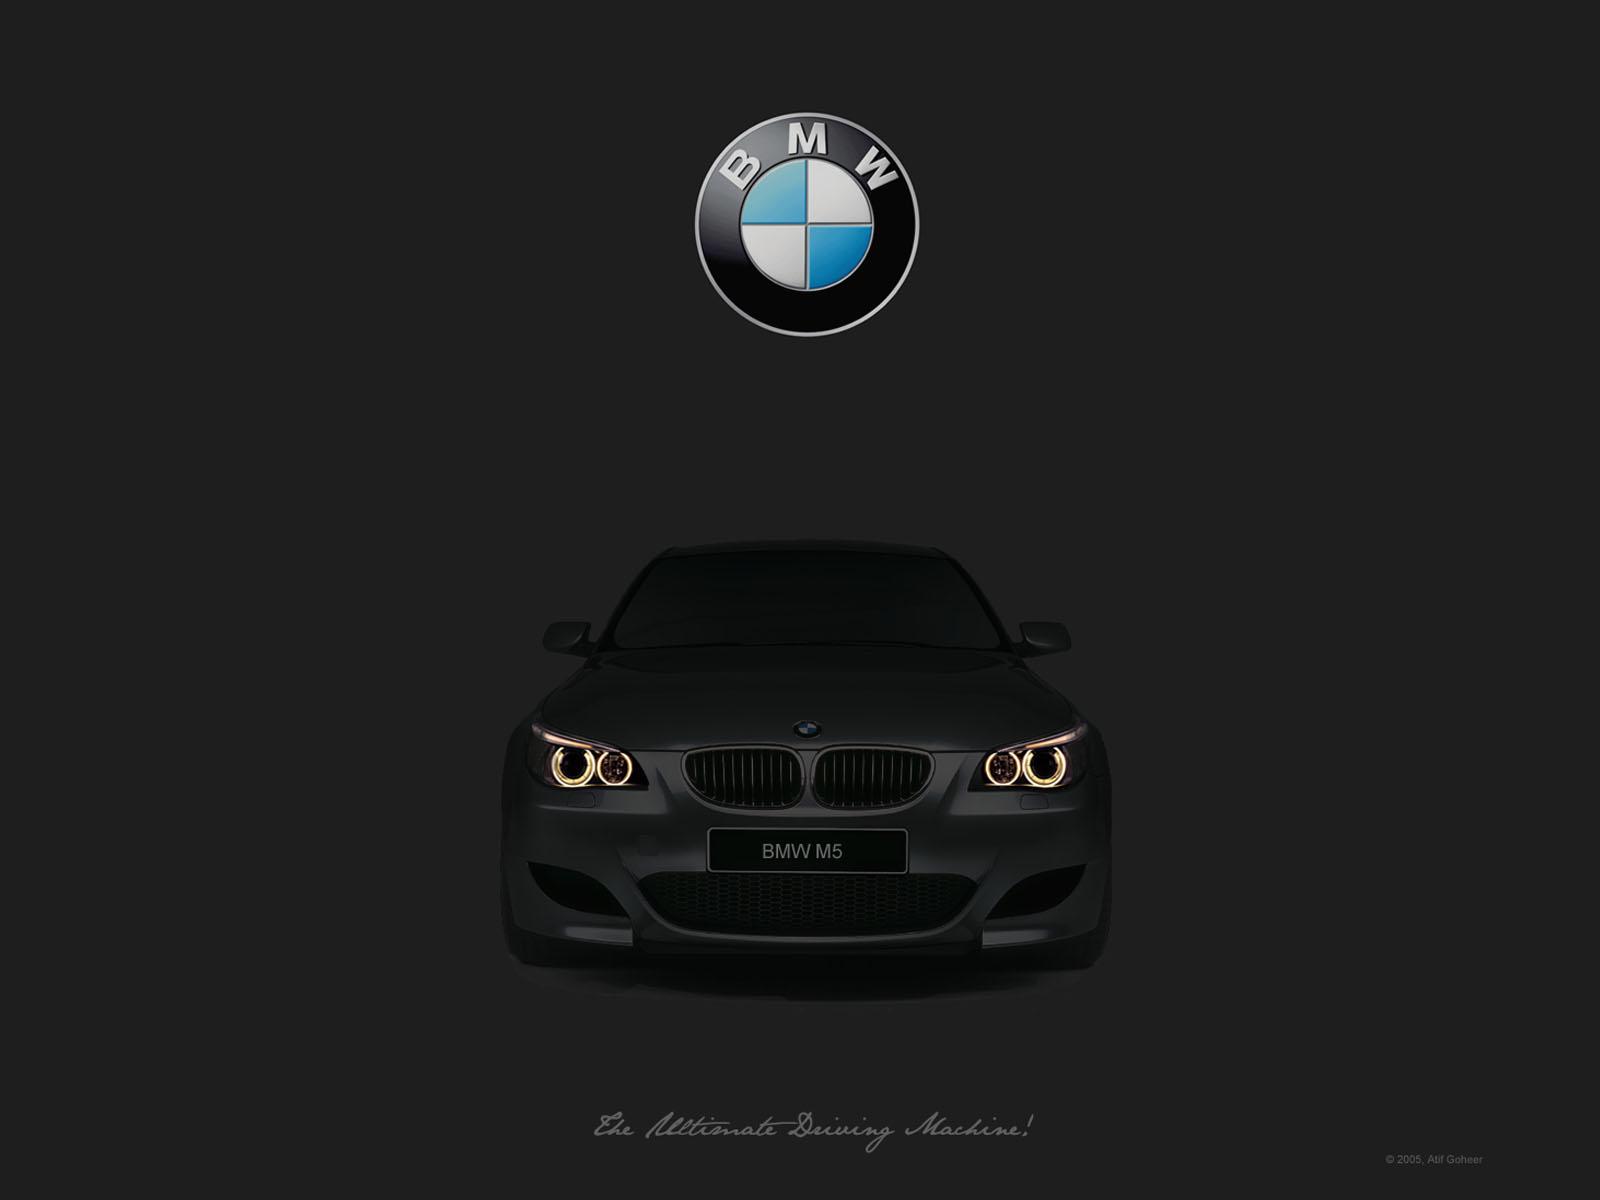 M5 Wallpaper! M5 Forum and M6 Forums